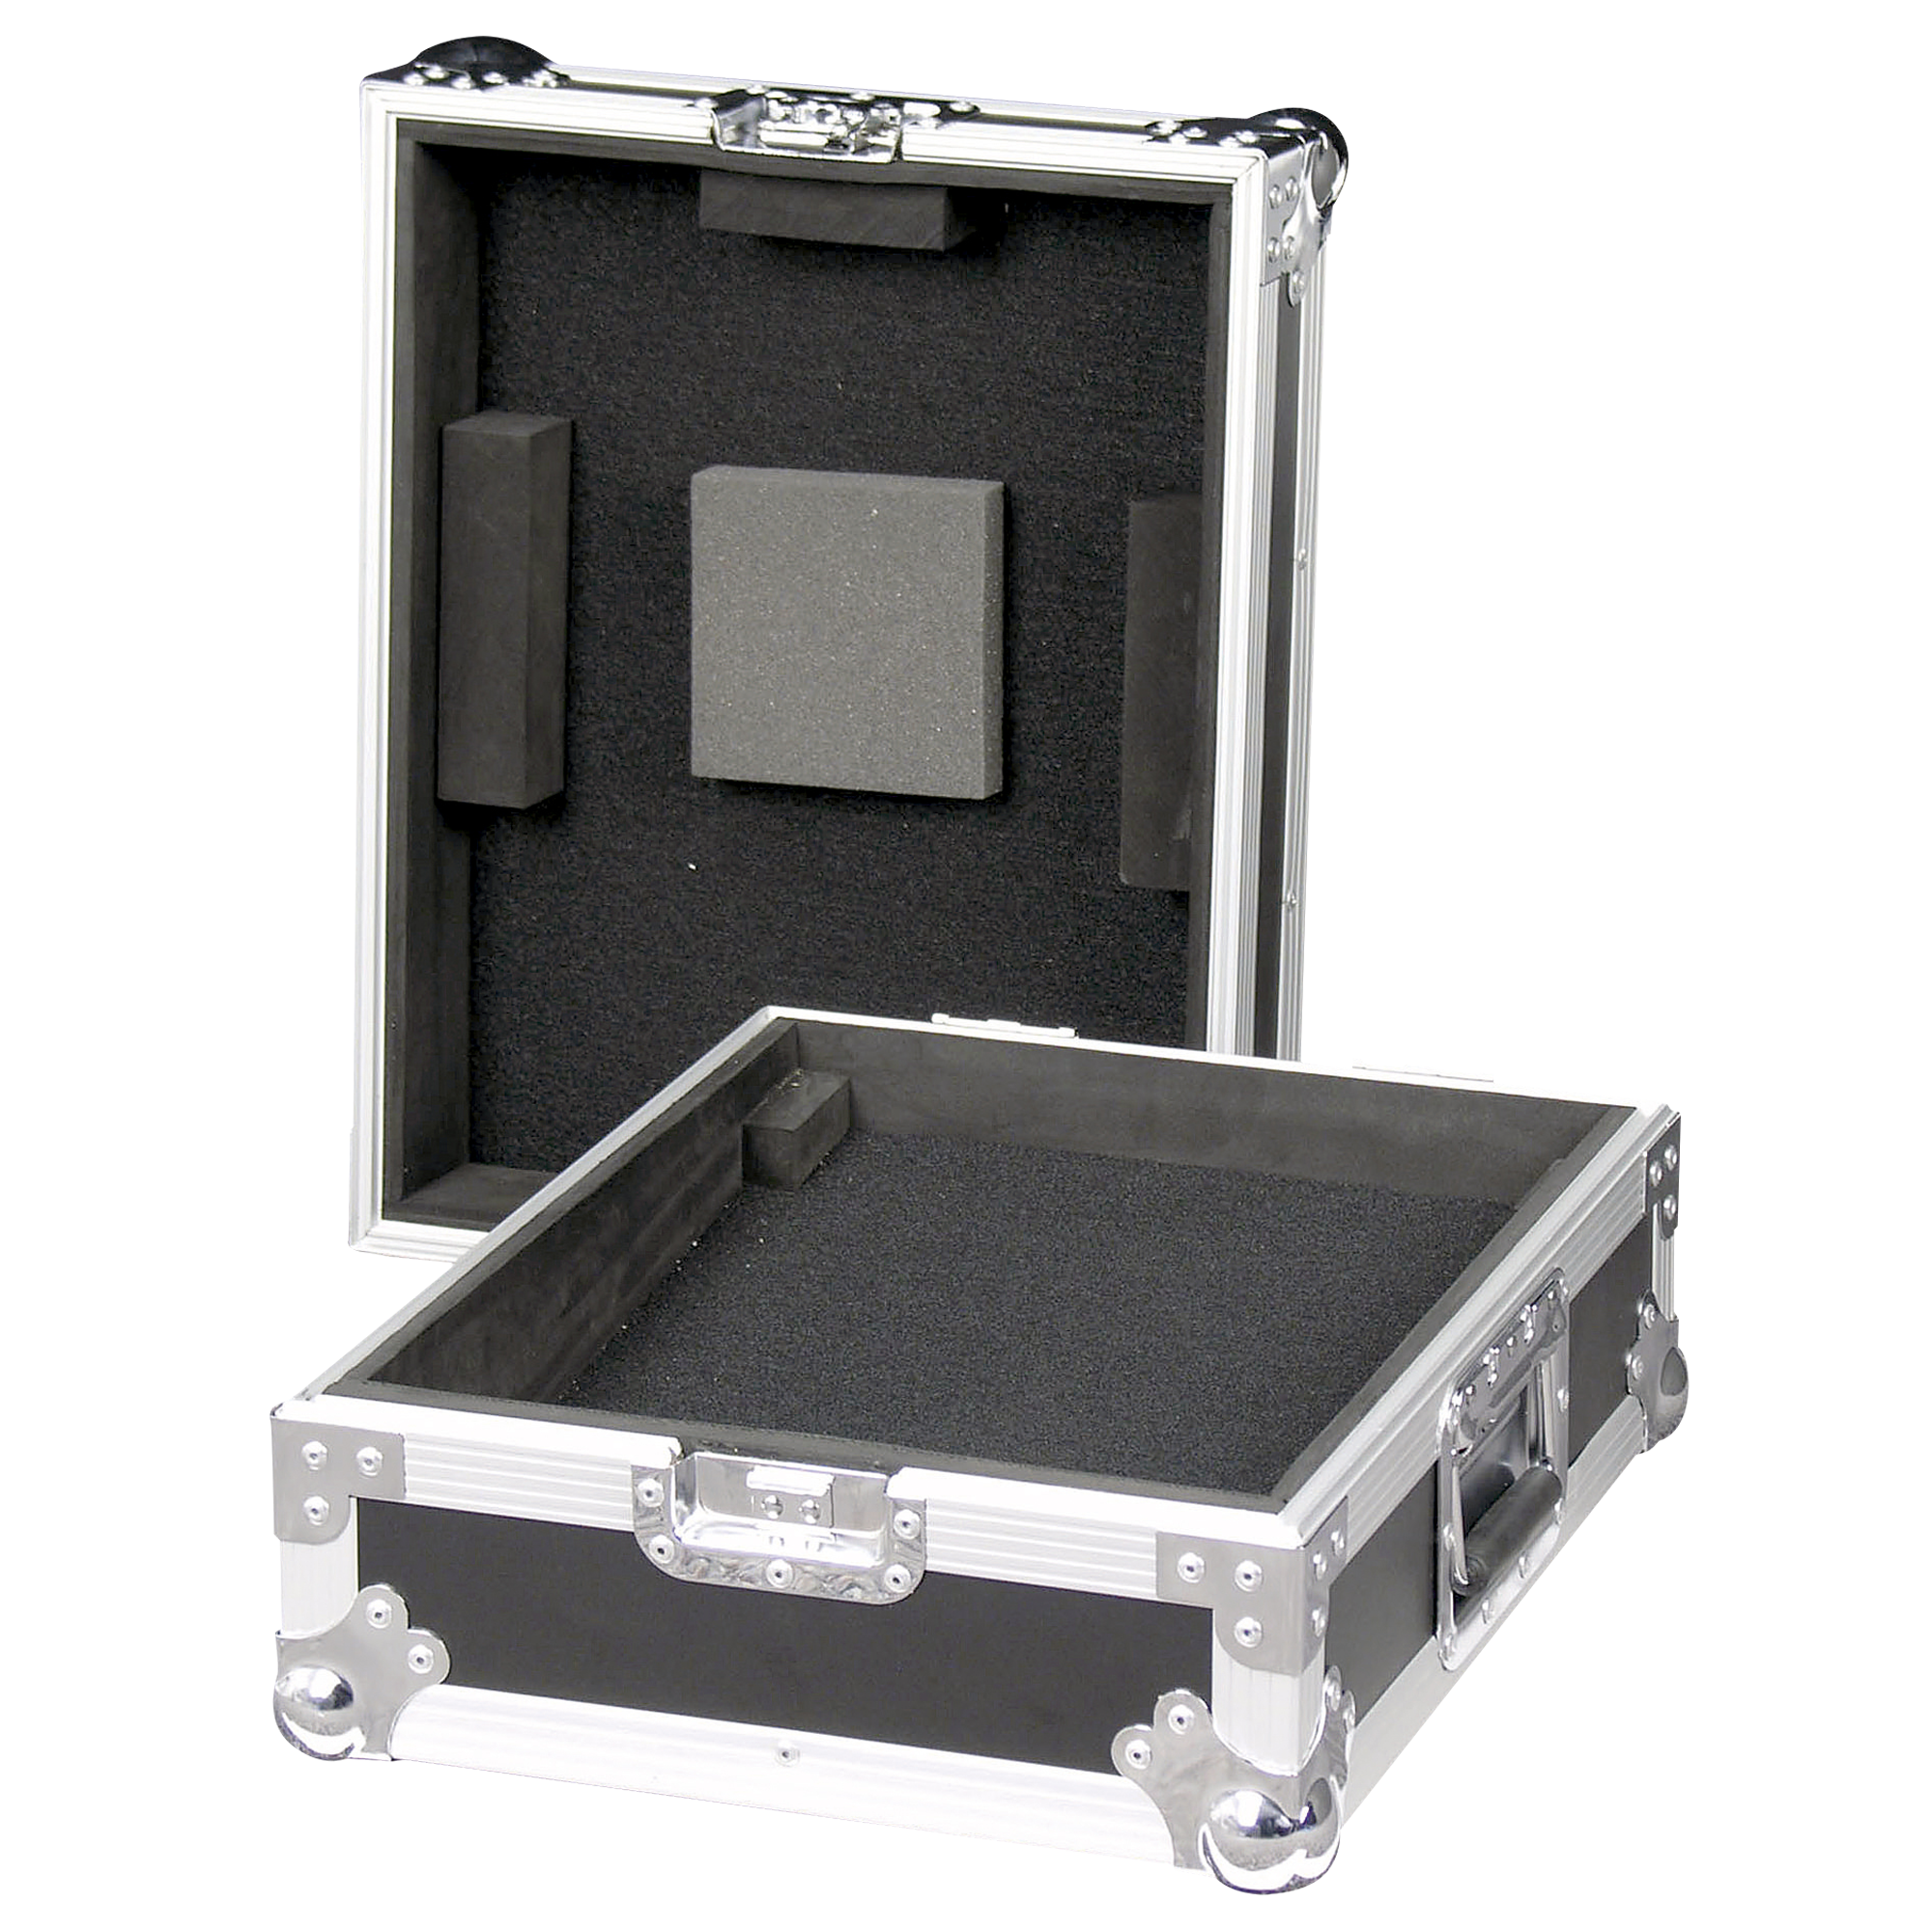 Showgear Case for Pioneer/Technics mixer With protective foam